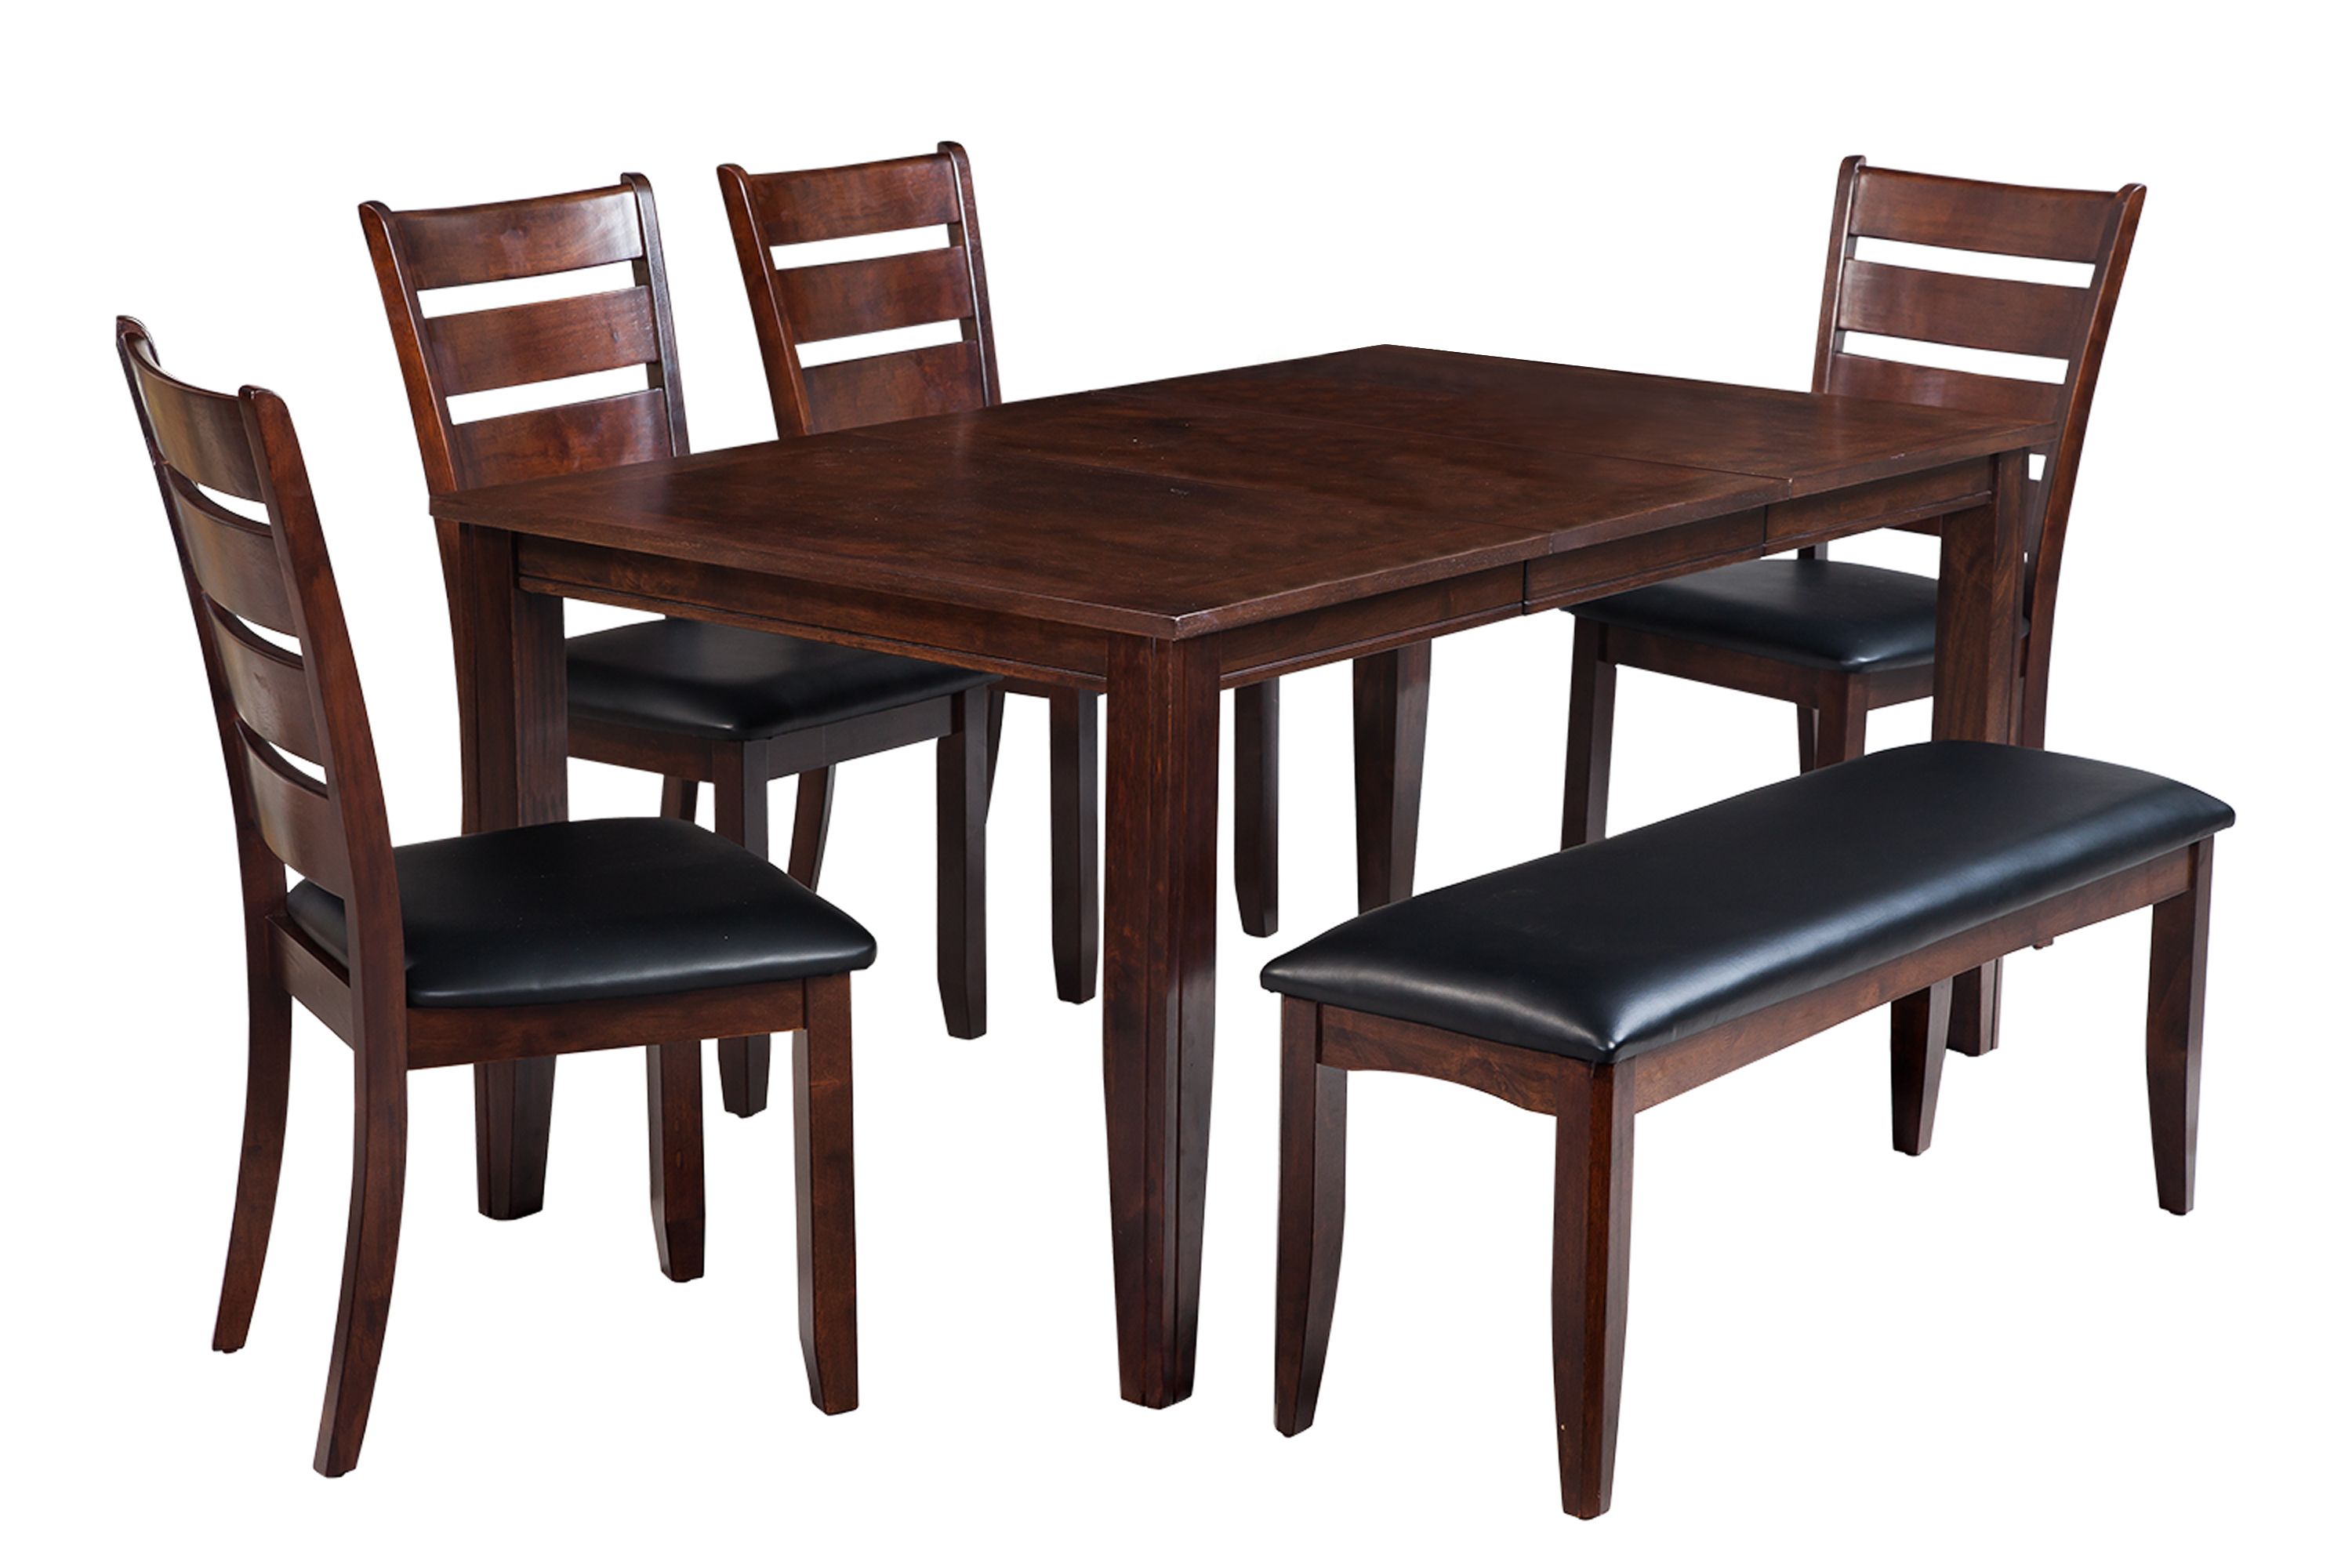 Adan 5 Piece Solid Wood Dining Sets (set Of 5) With Regard To Recent Ttp Furnish (View 19 of 20)